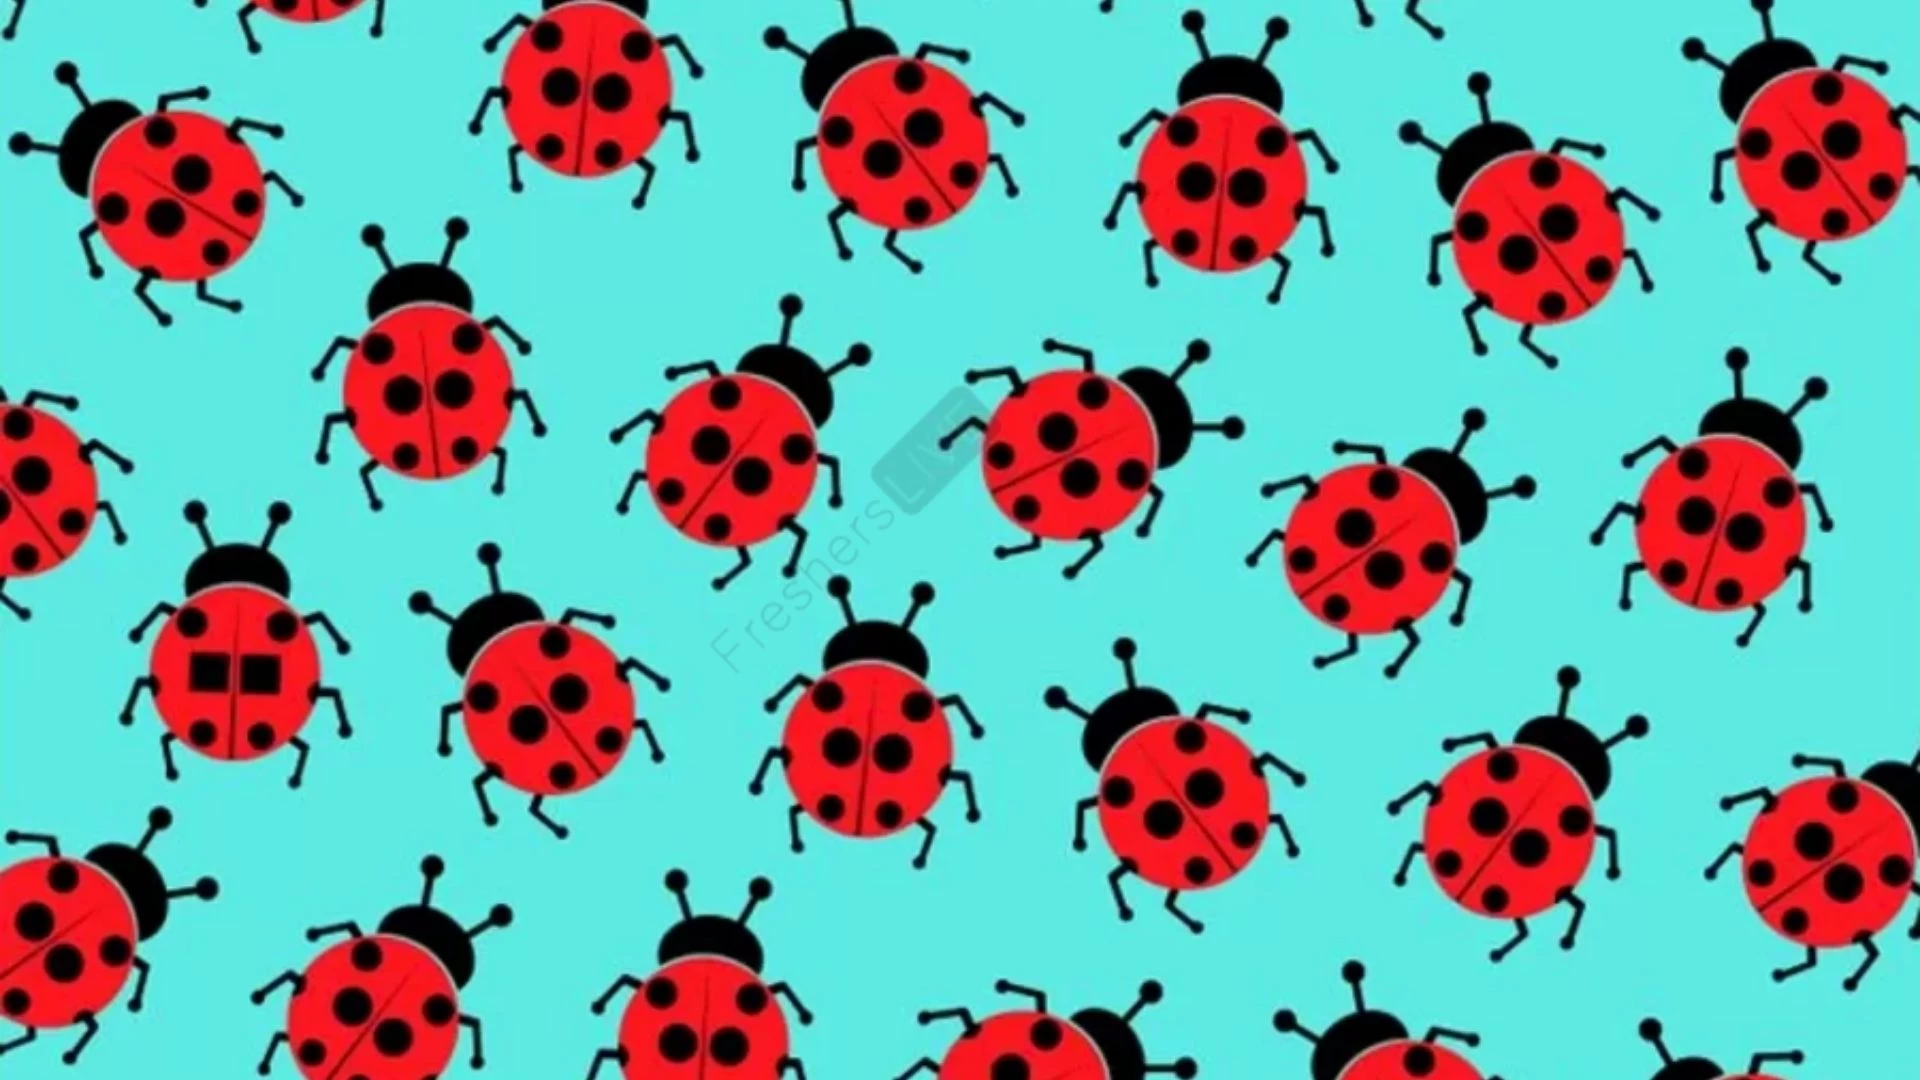 You are Intelligent If You Spot the Ladybug with Square Spots in Less than 10 Seconds